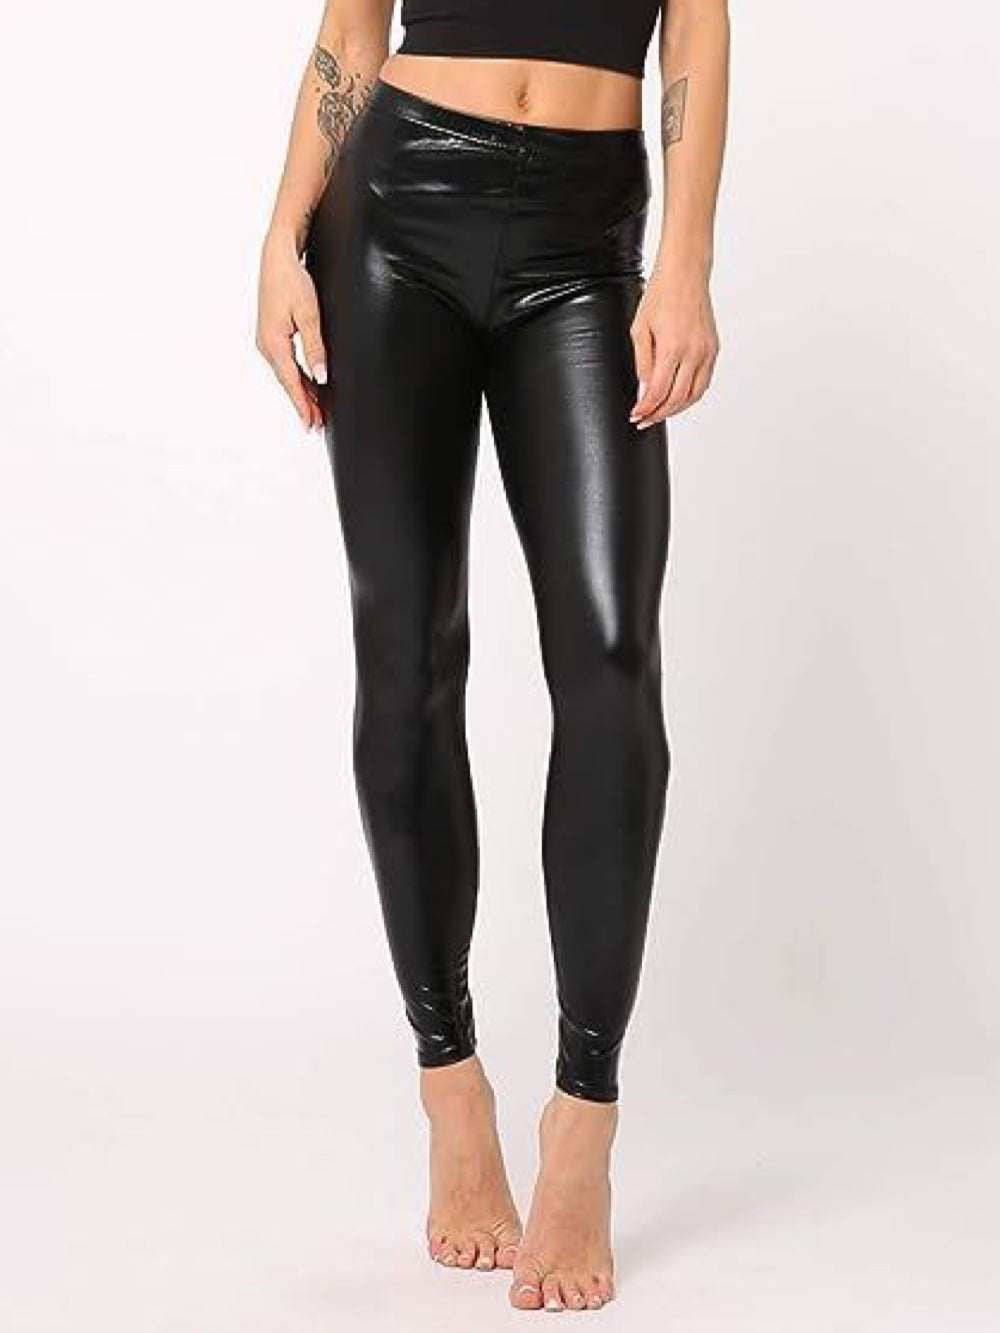 BooW Women's Shiny Metallic Leggings Sexy High Gloss Skinny Pants Faux Leather Stretch Shaping Tights Trousers - Legacy Boutiques